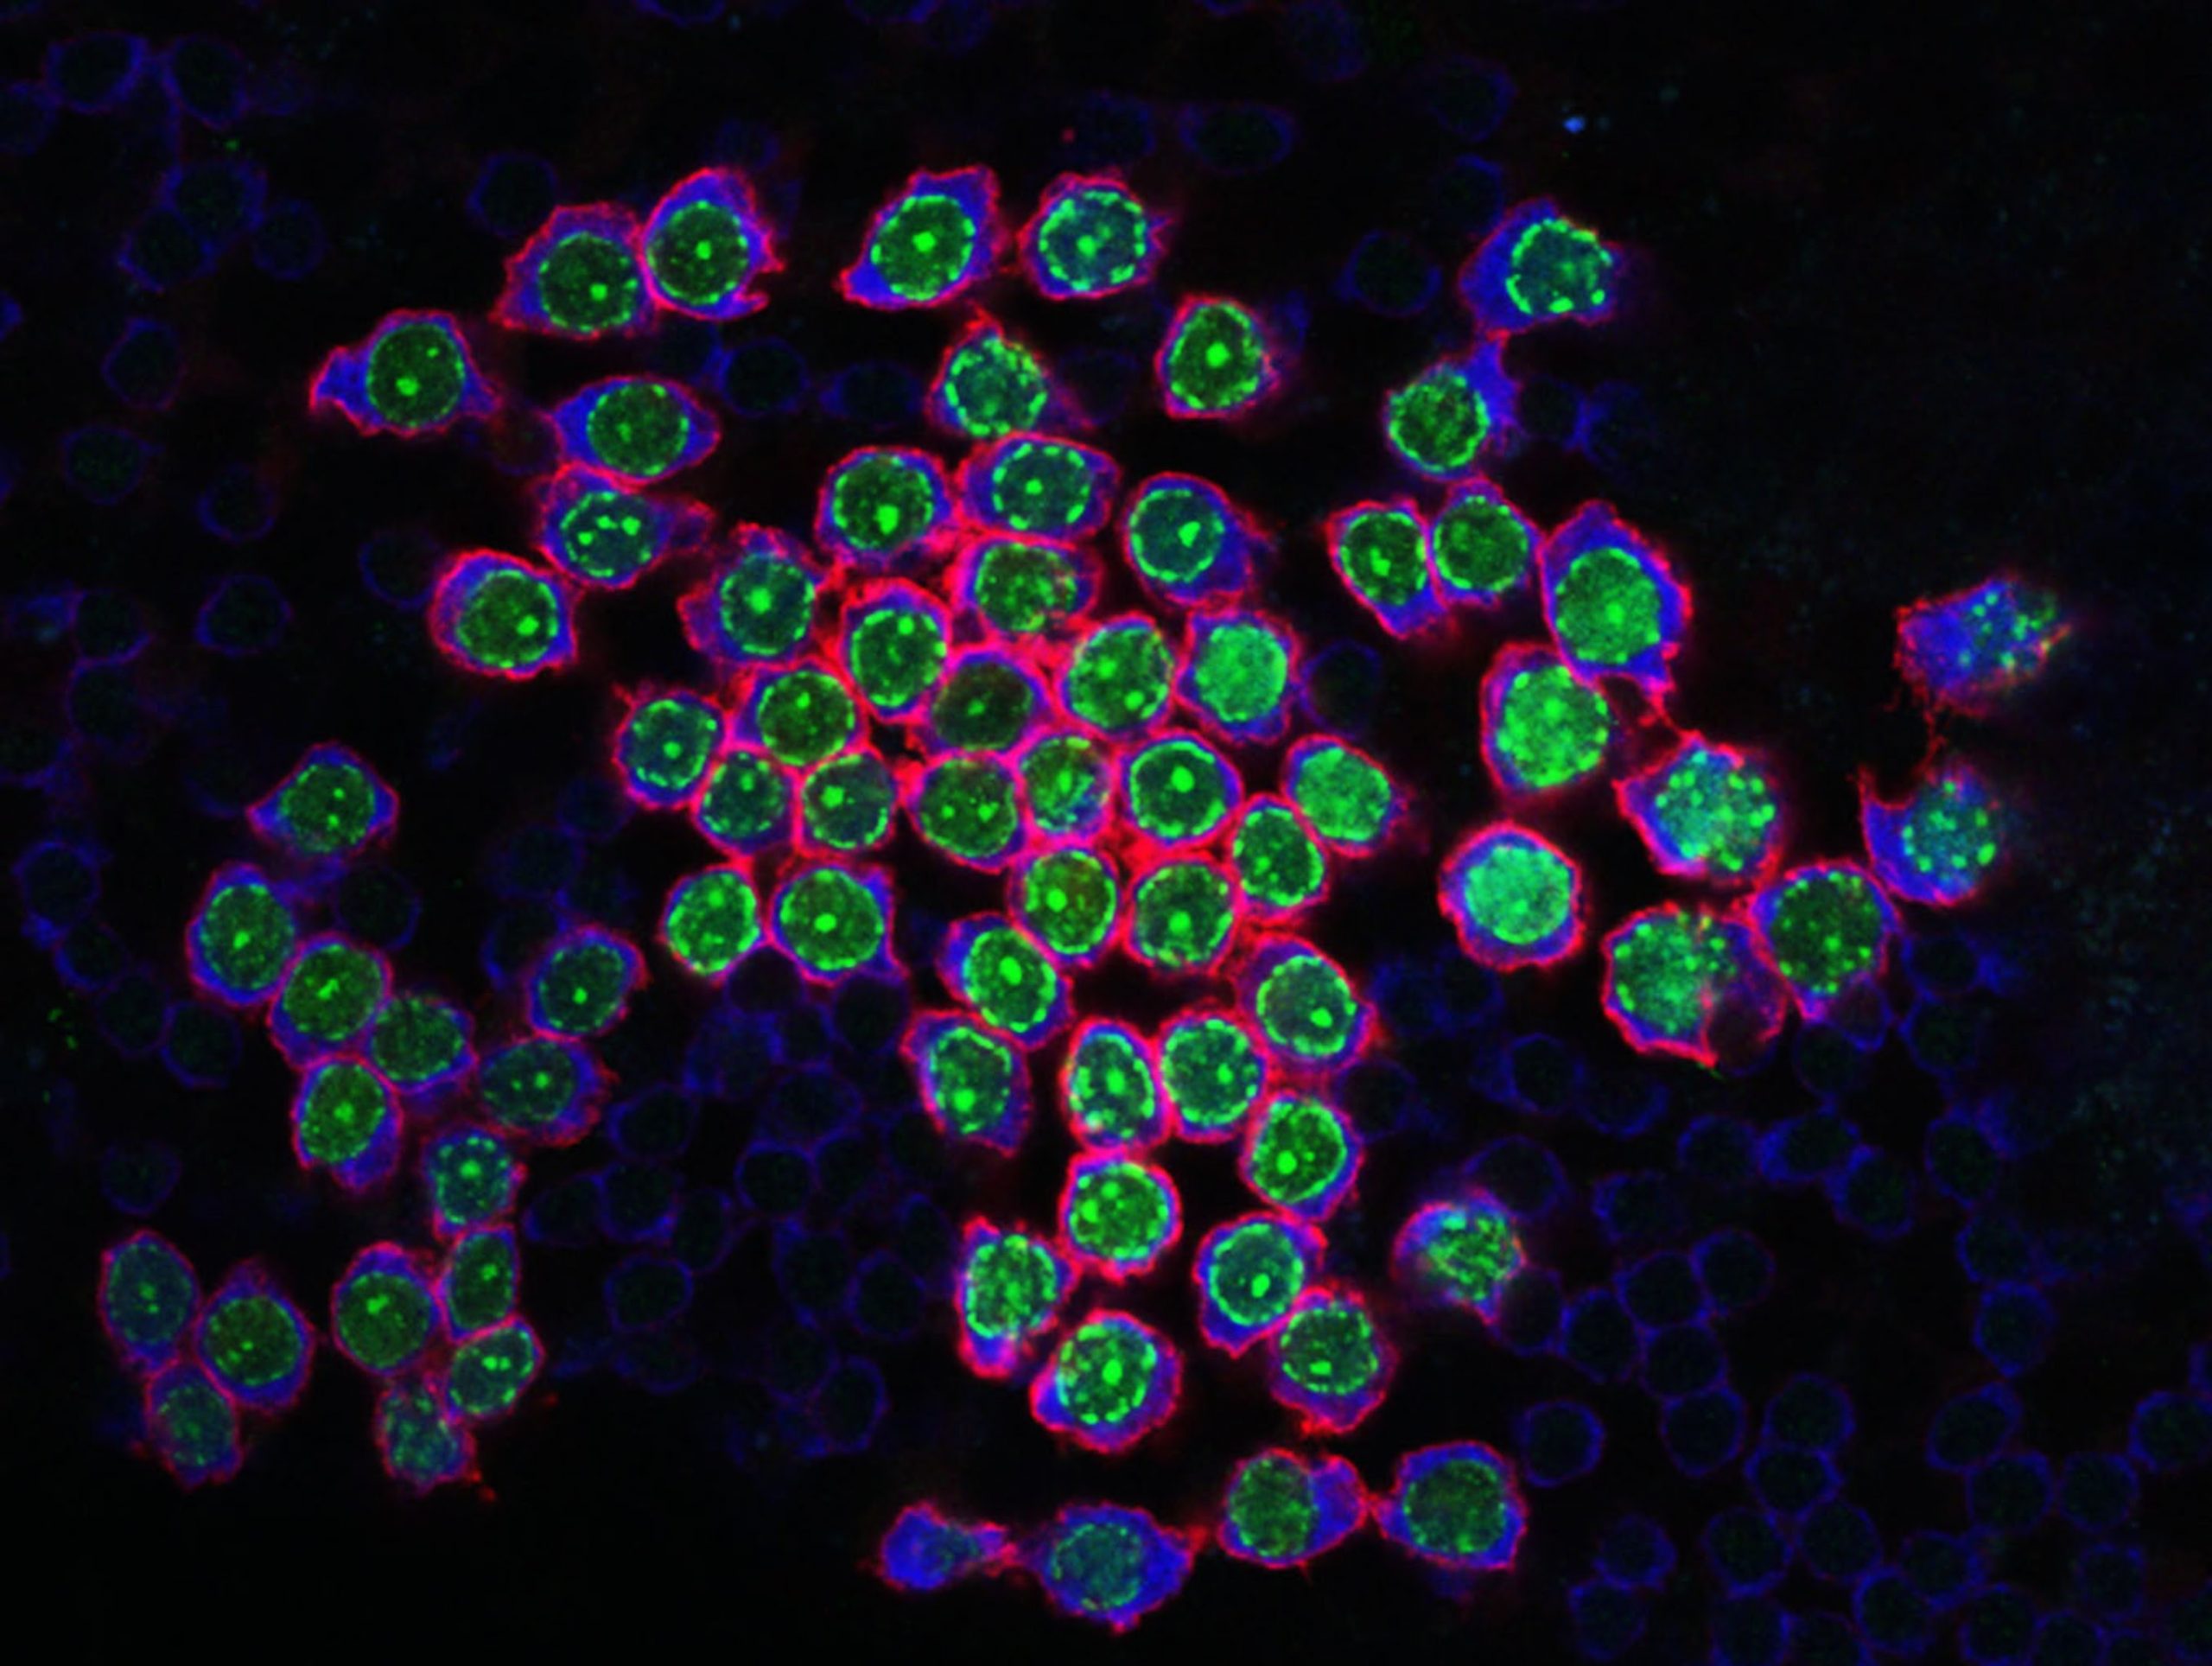 Germline stem cell image highlighted with lime green and pink colours